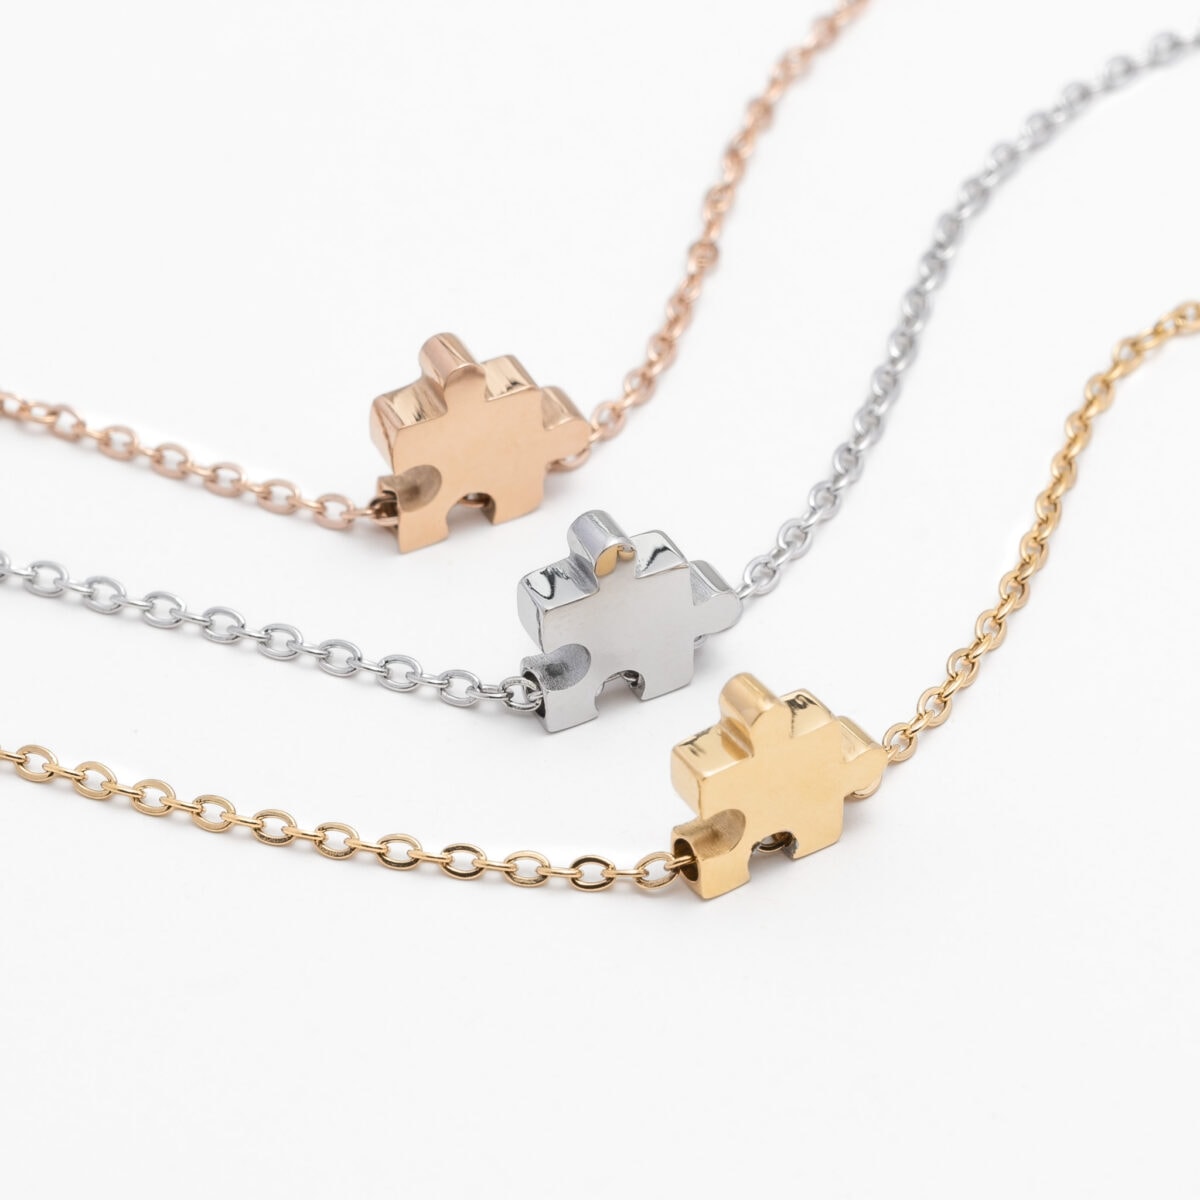 https://m.clubbella.co/product/duna-rose-gold-puzzle-charm-necklace/ Duna Puzzle Rose Gold (1)